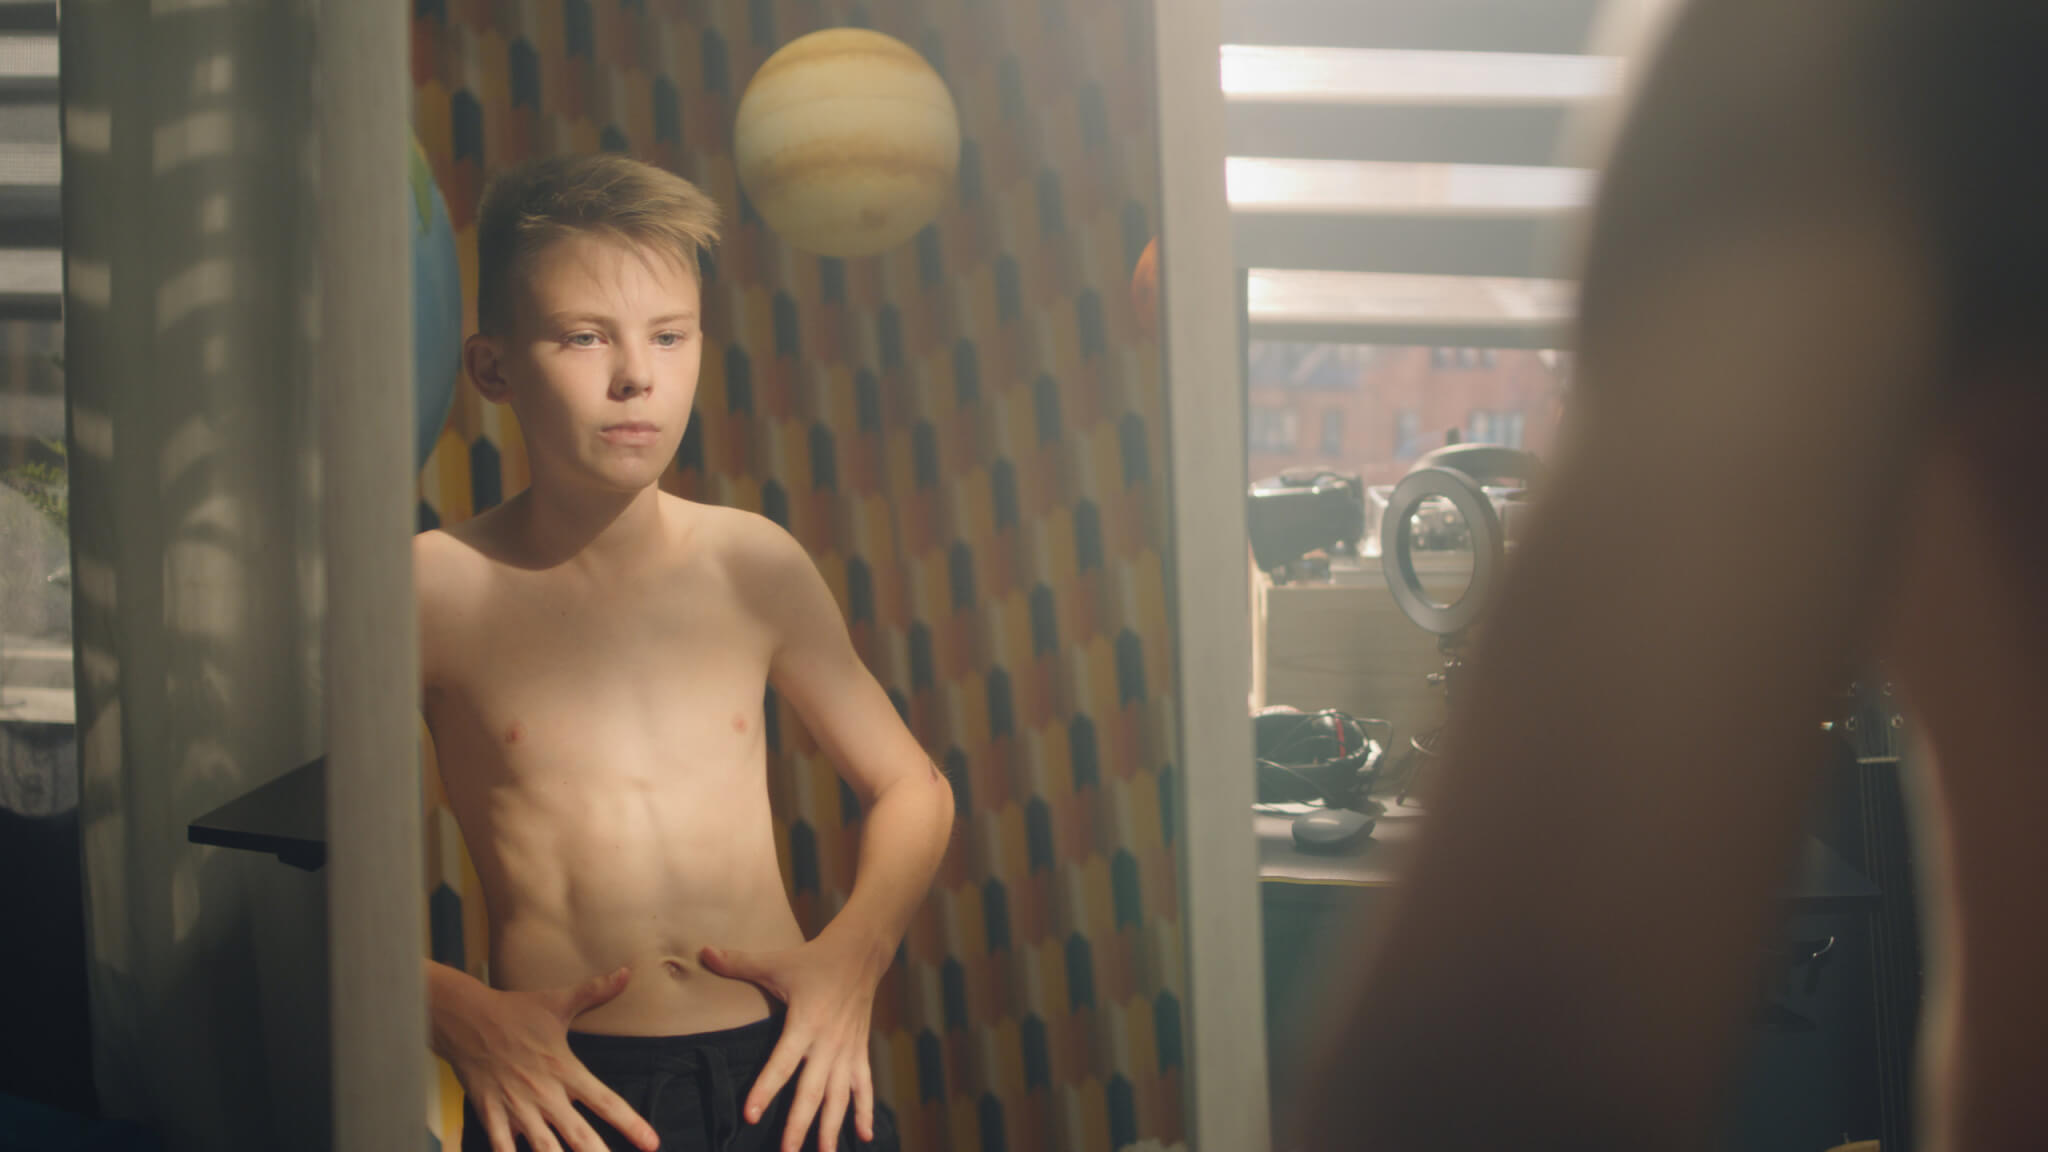 Muscular young boy examines his body infront of the mirror after weight training